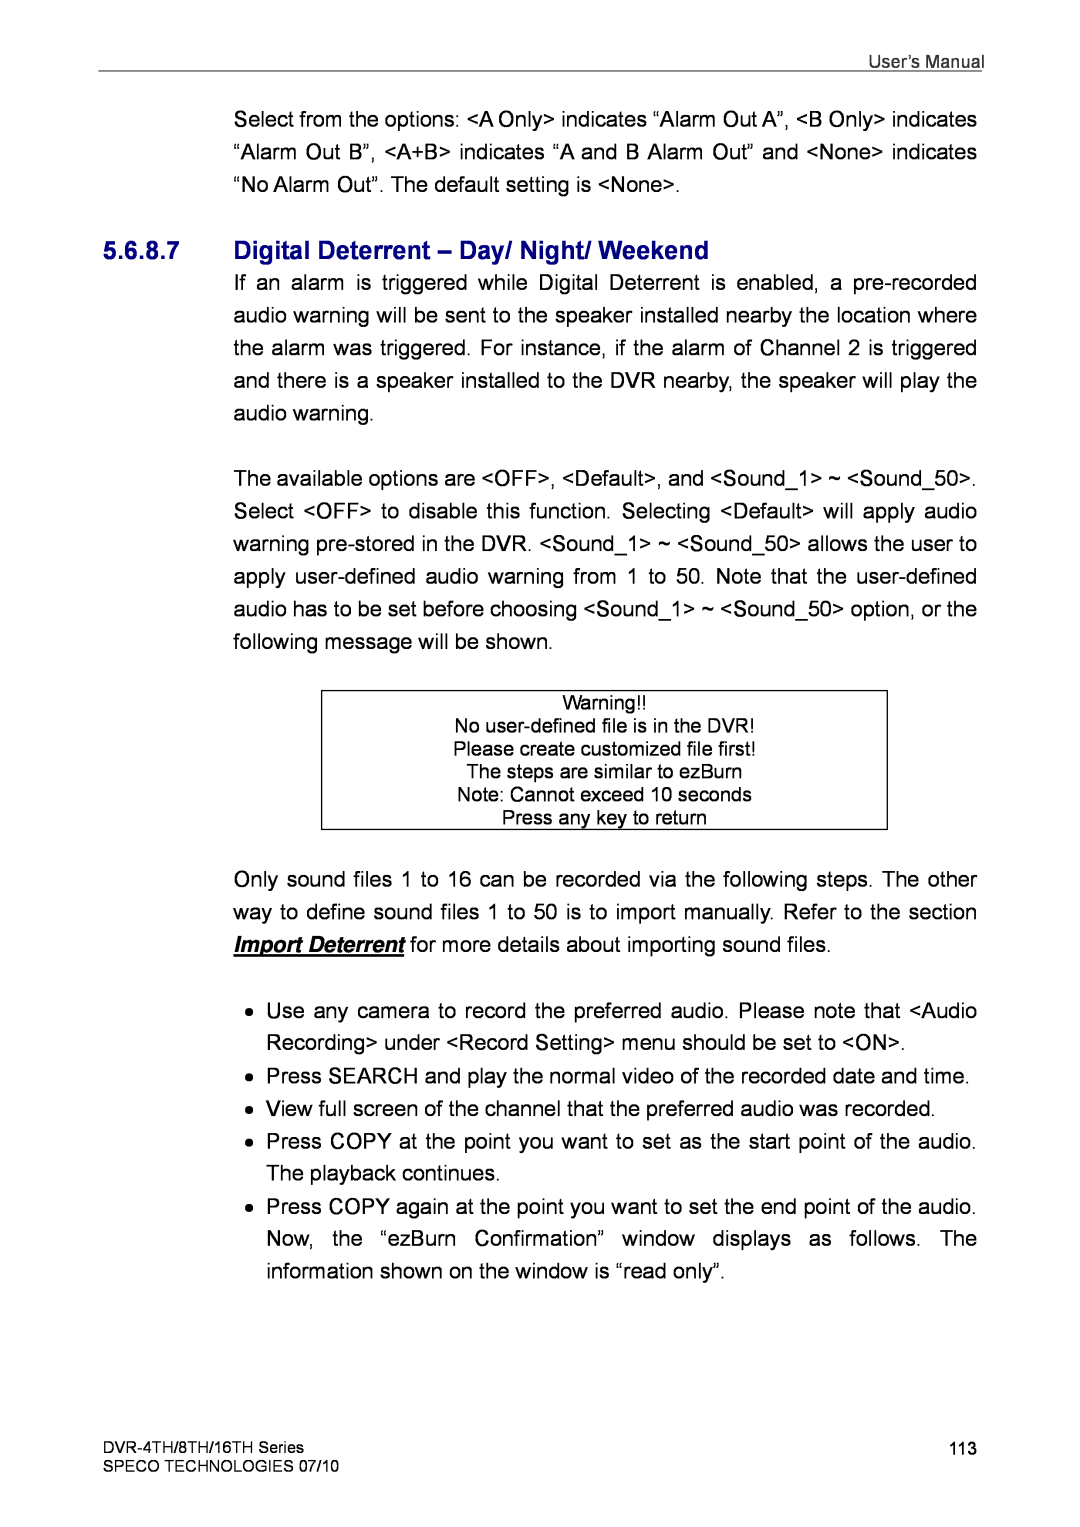 Speco Technologies 8TH, 4TH, 16TH user manual Digital Deterrent - Day/ Night/ Weekend 